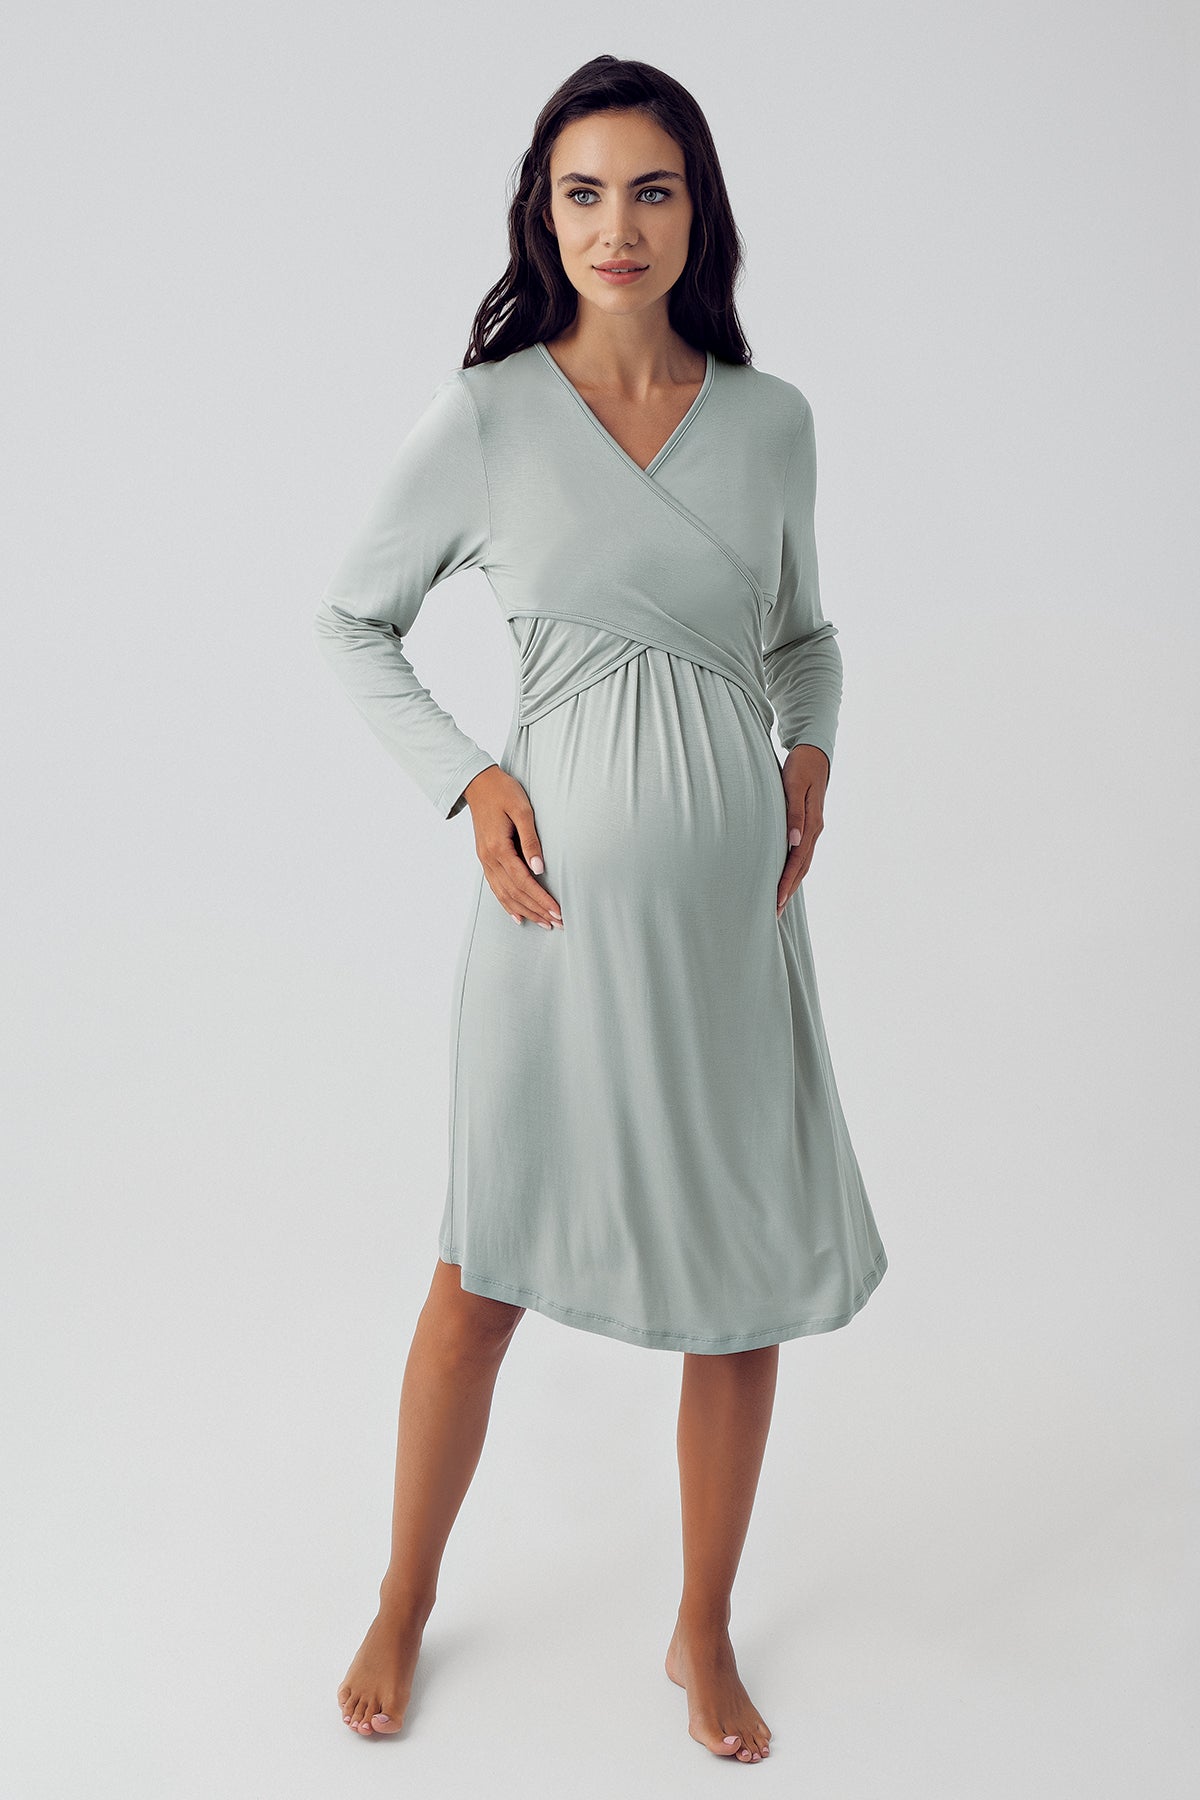 Cross Double Breasted Maternity & Nursing Nightgown With Patterned Robe Green - 15405